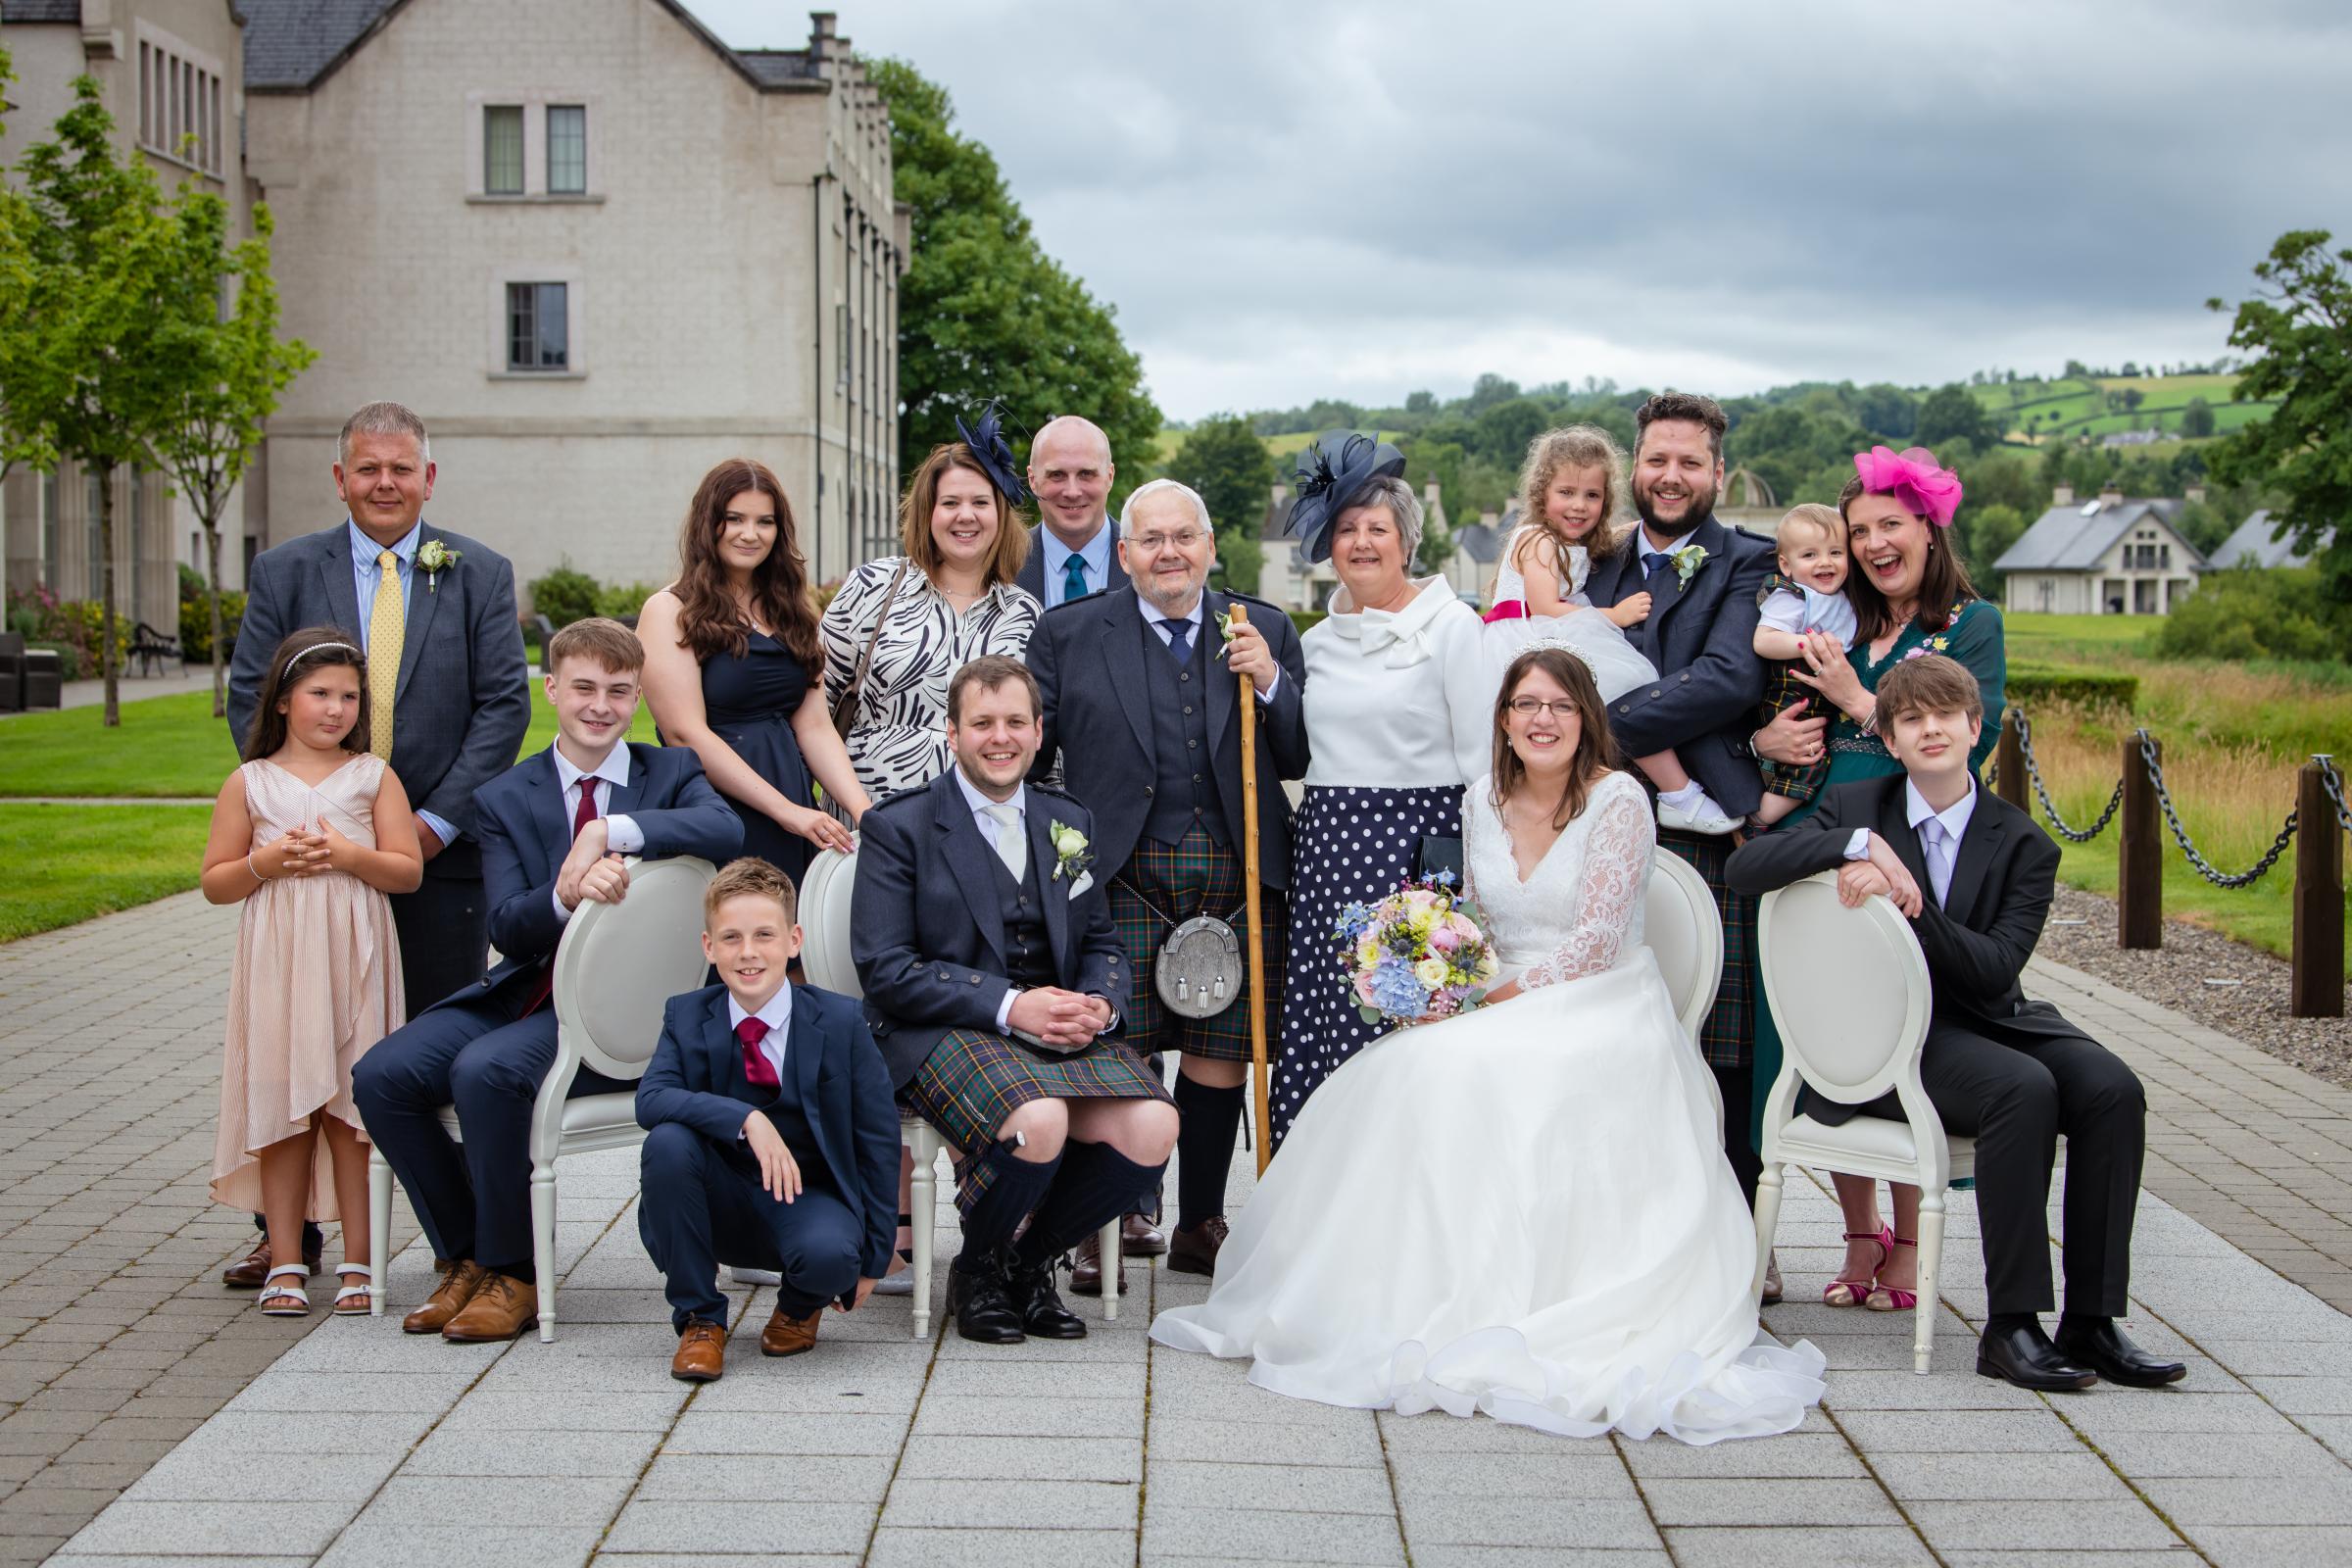 Graham and Helen with the Hambley family. Photo: Erica Irvine Photography.